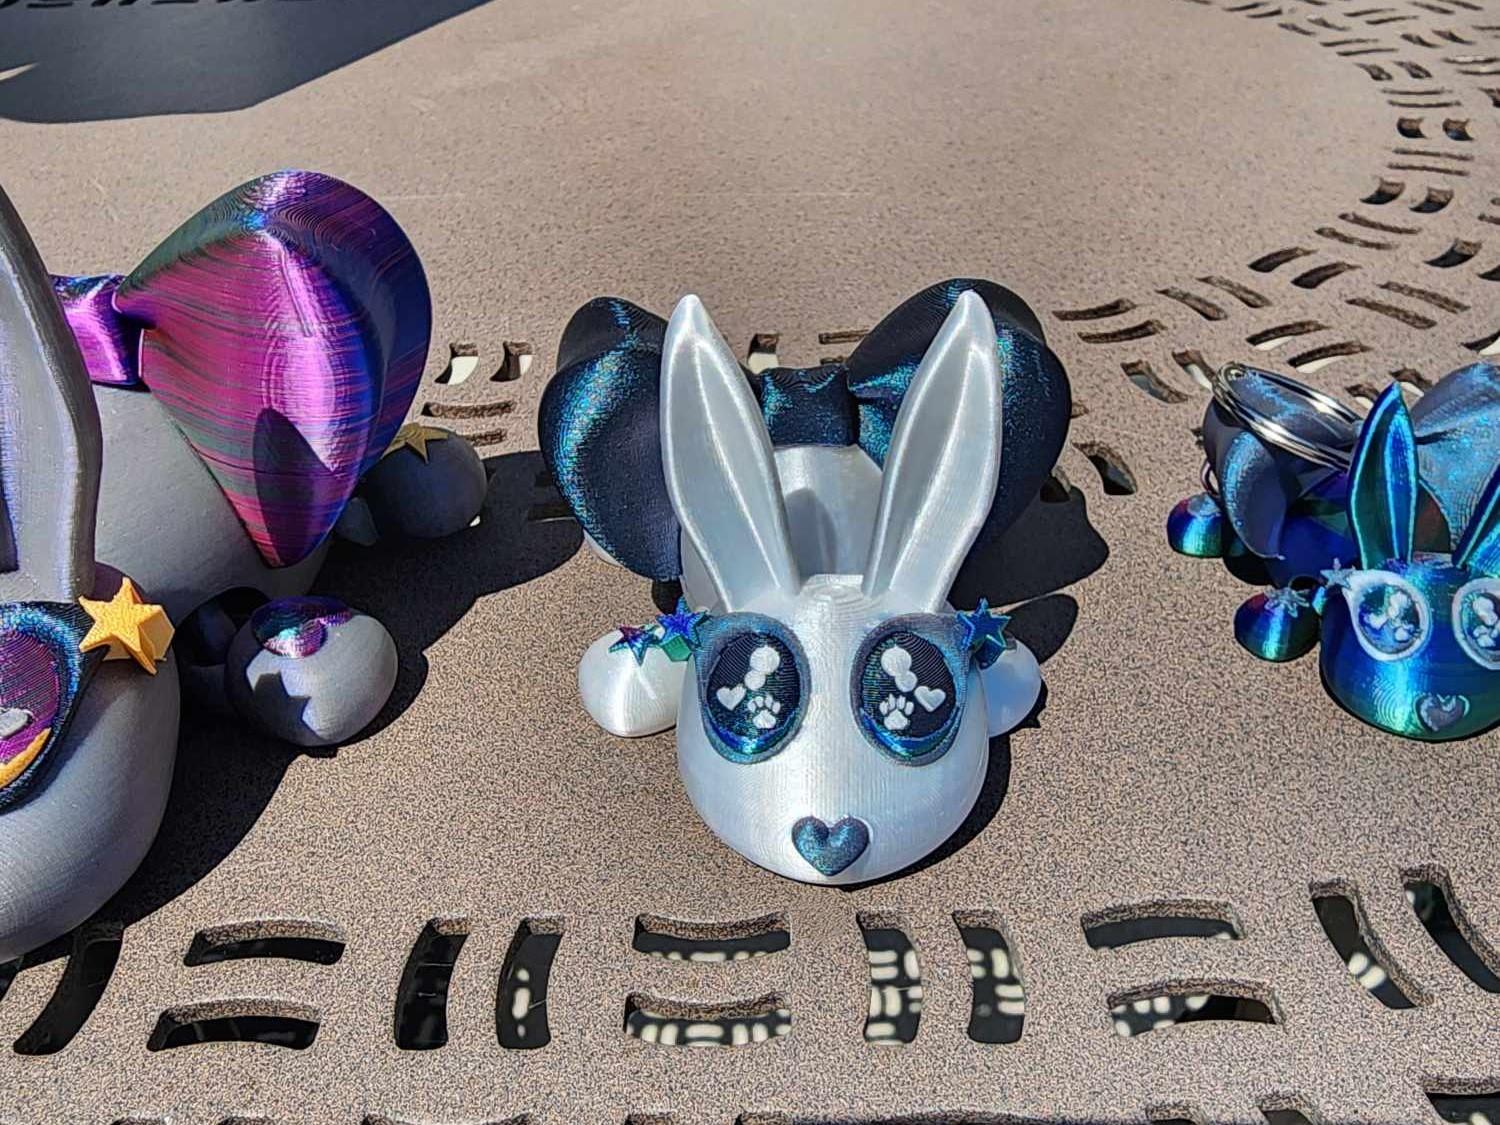 Dazzling Bunny Flexi and Keychain 3d model